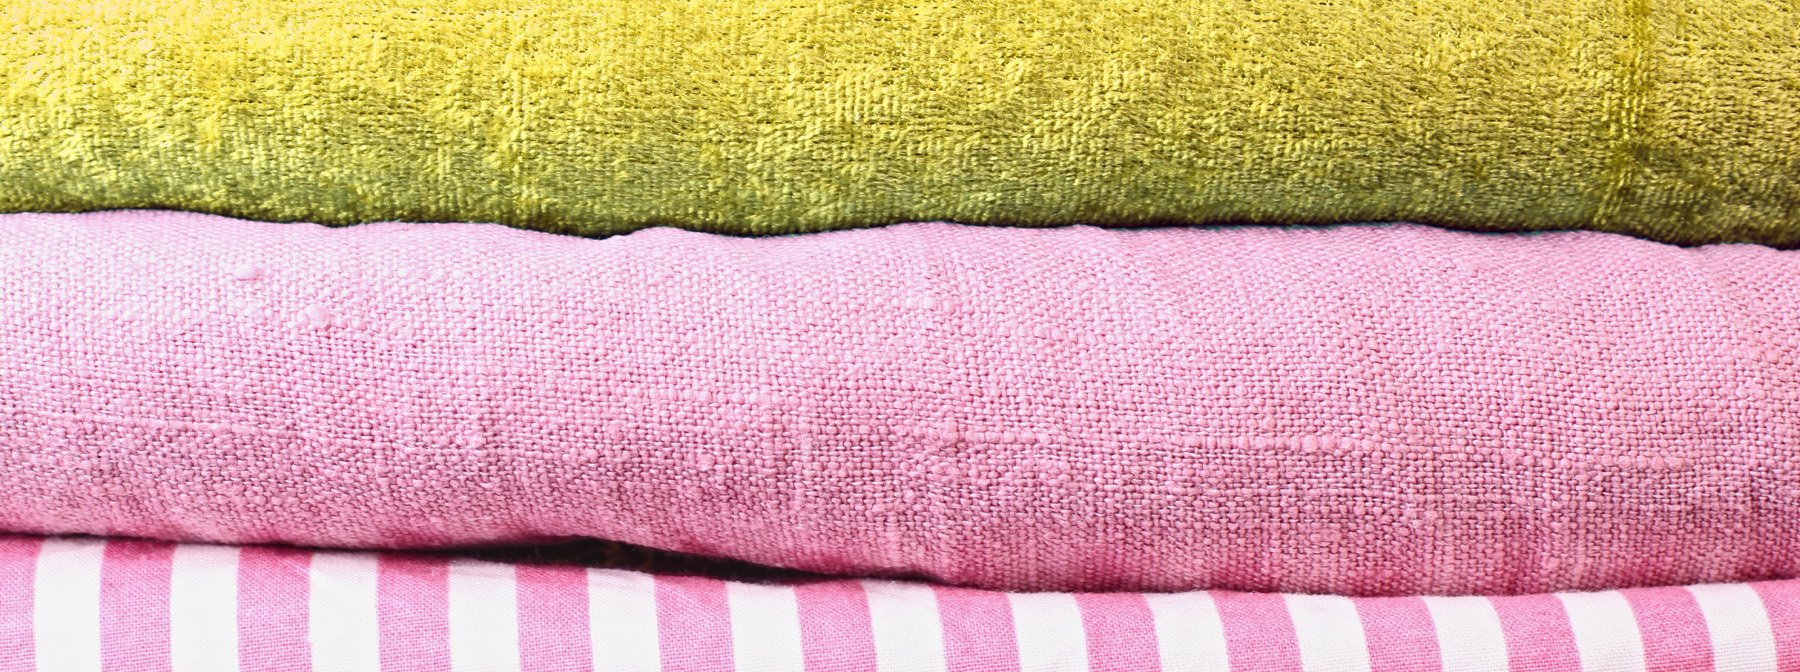 1.5 Million UK Residents Wash Their Towels Once A Year, Study Suggests